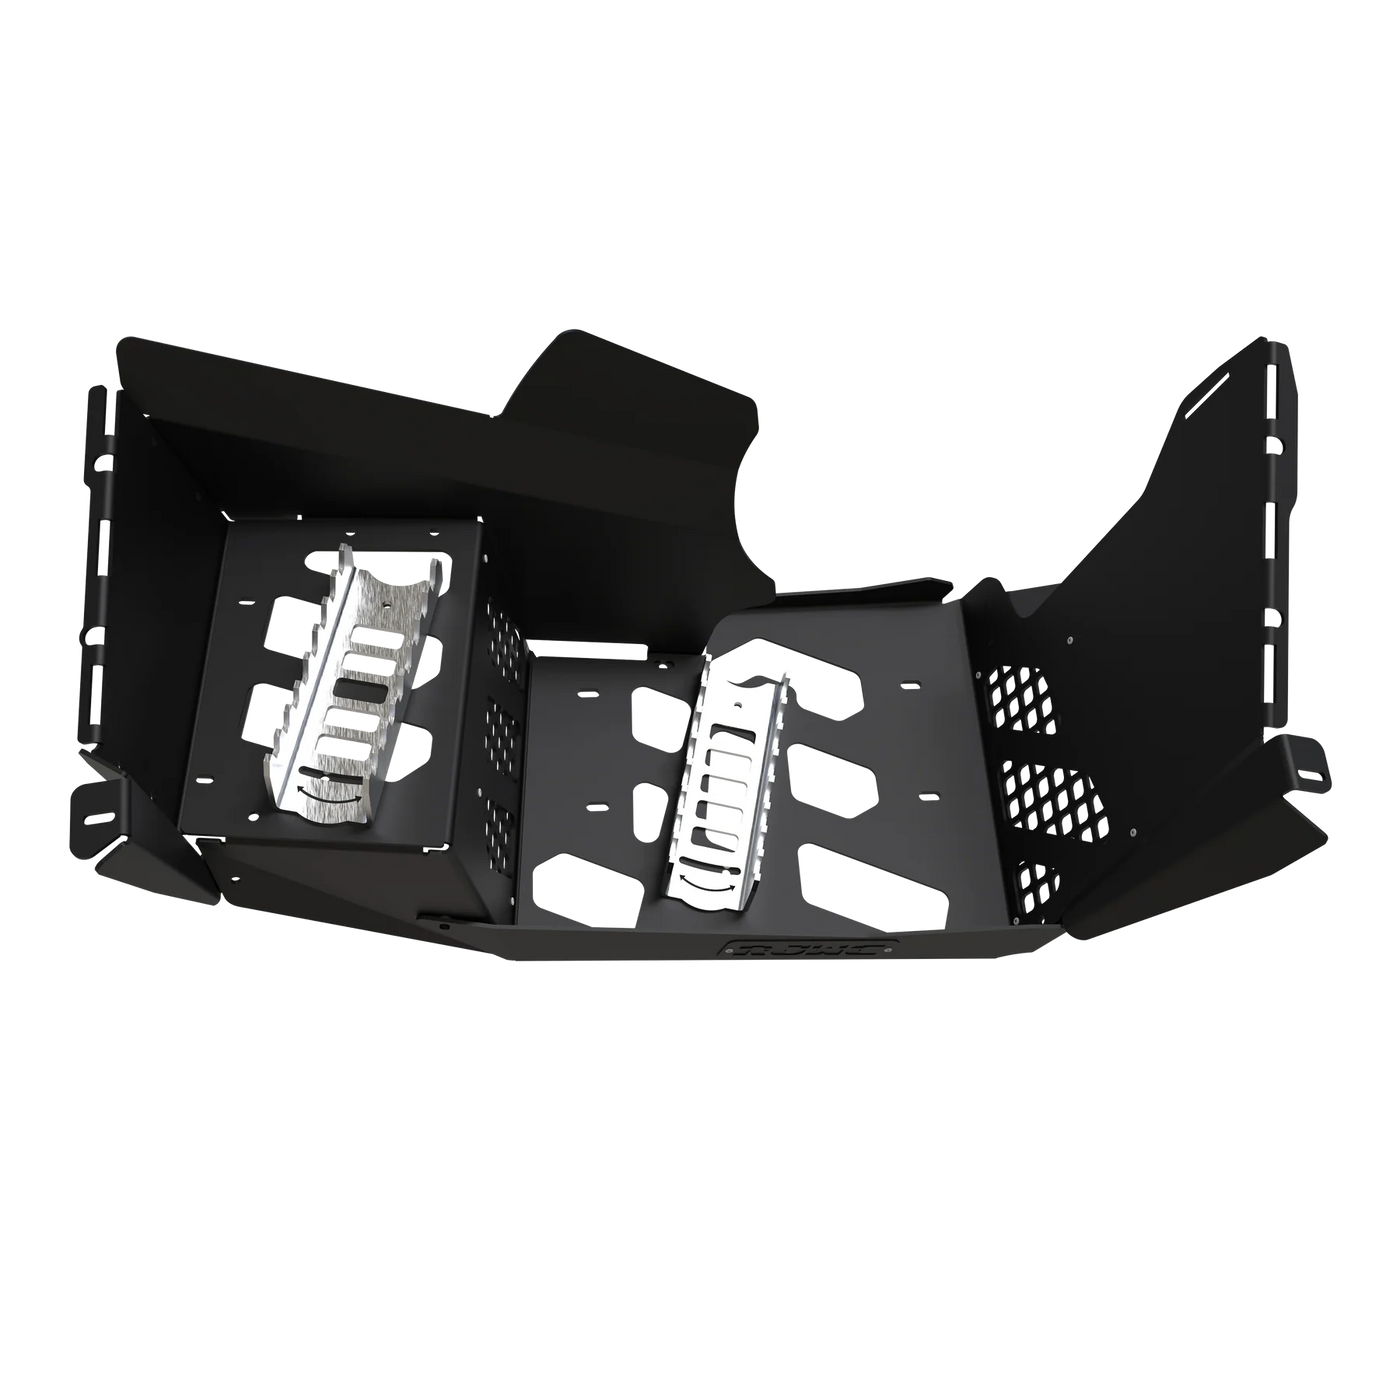 RJWC - Can-Am Outlander G2 MAX Floorboards (COMING SOON) - K Tuning 